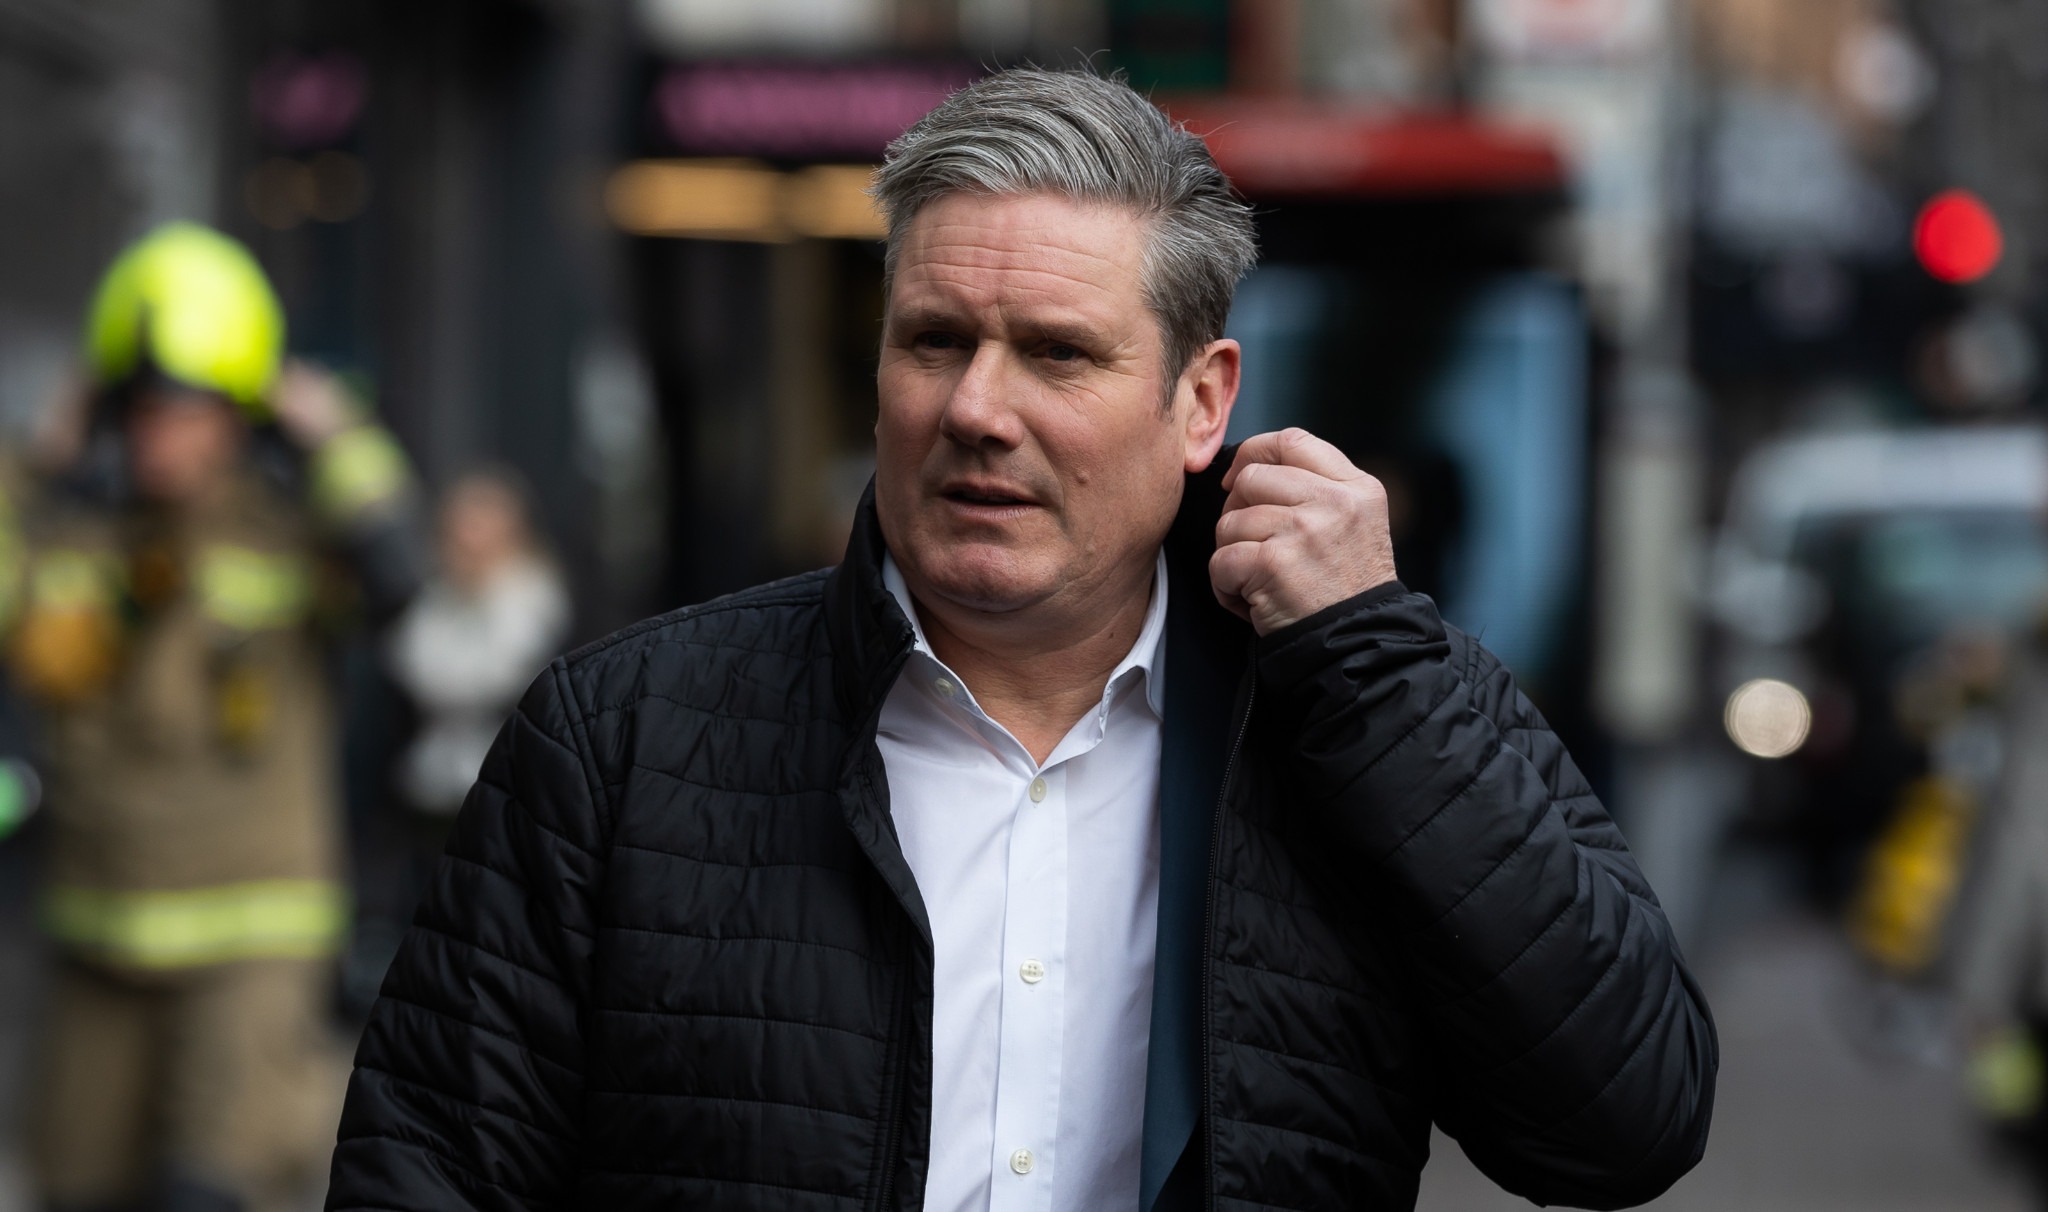 Revealed: Keir Starmer billed taxpayer nearly £250,000 for travel expenses at CPS